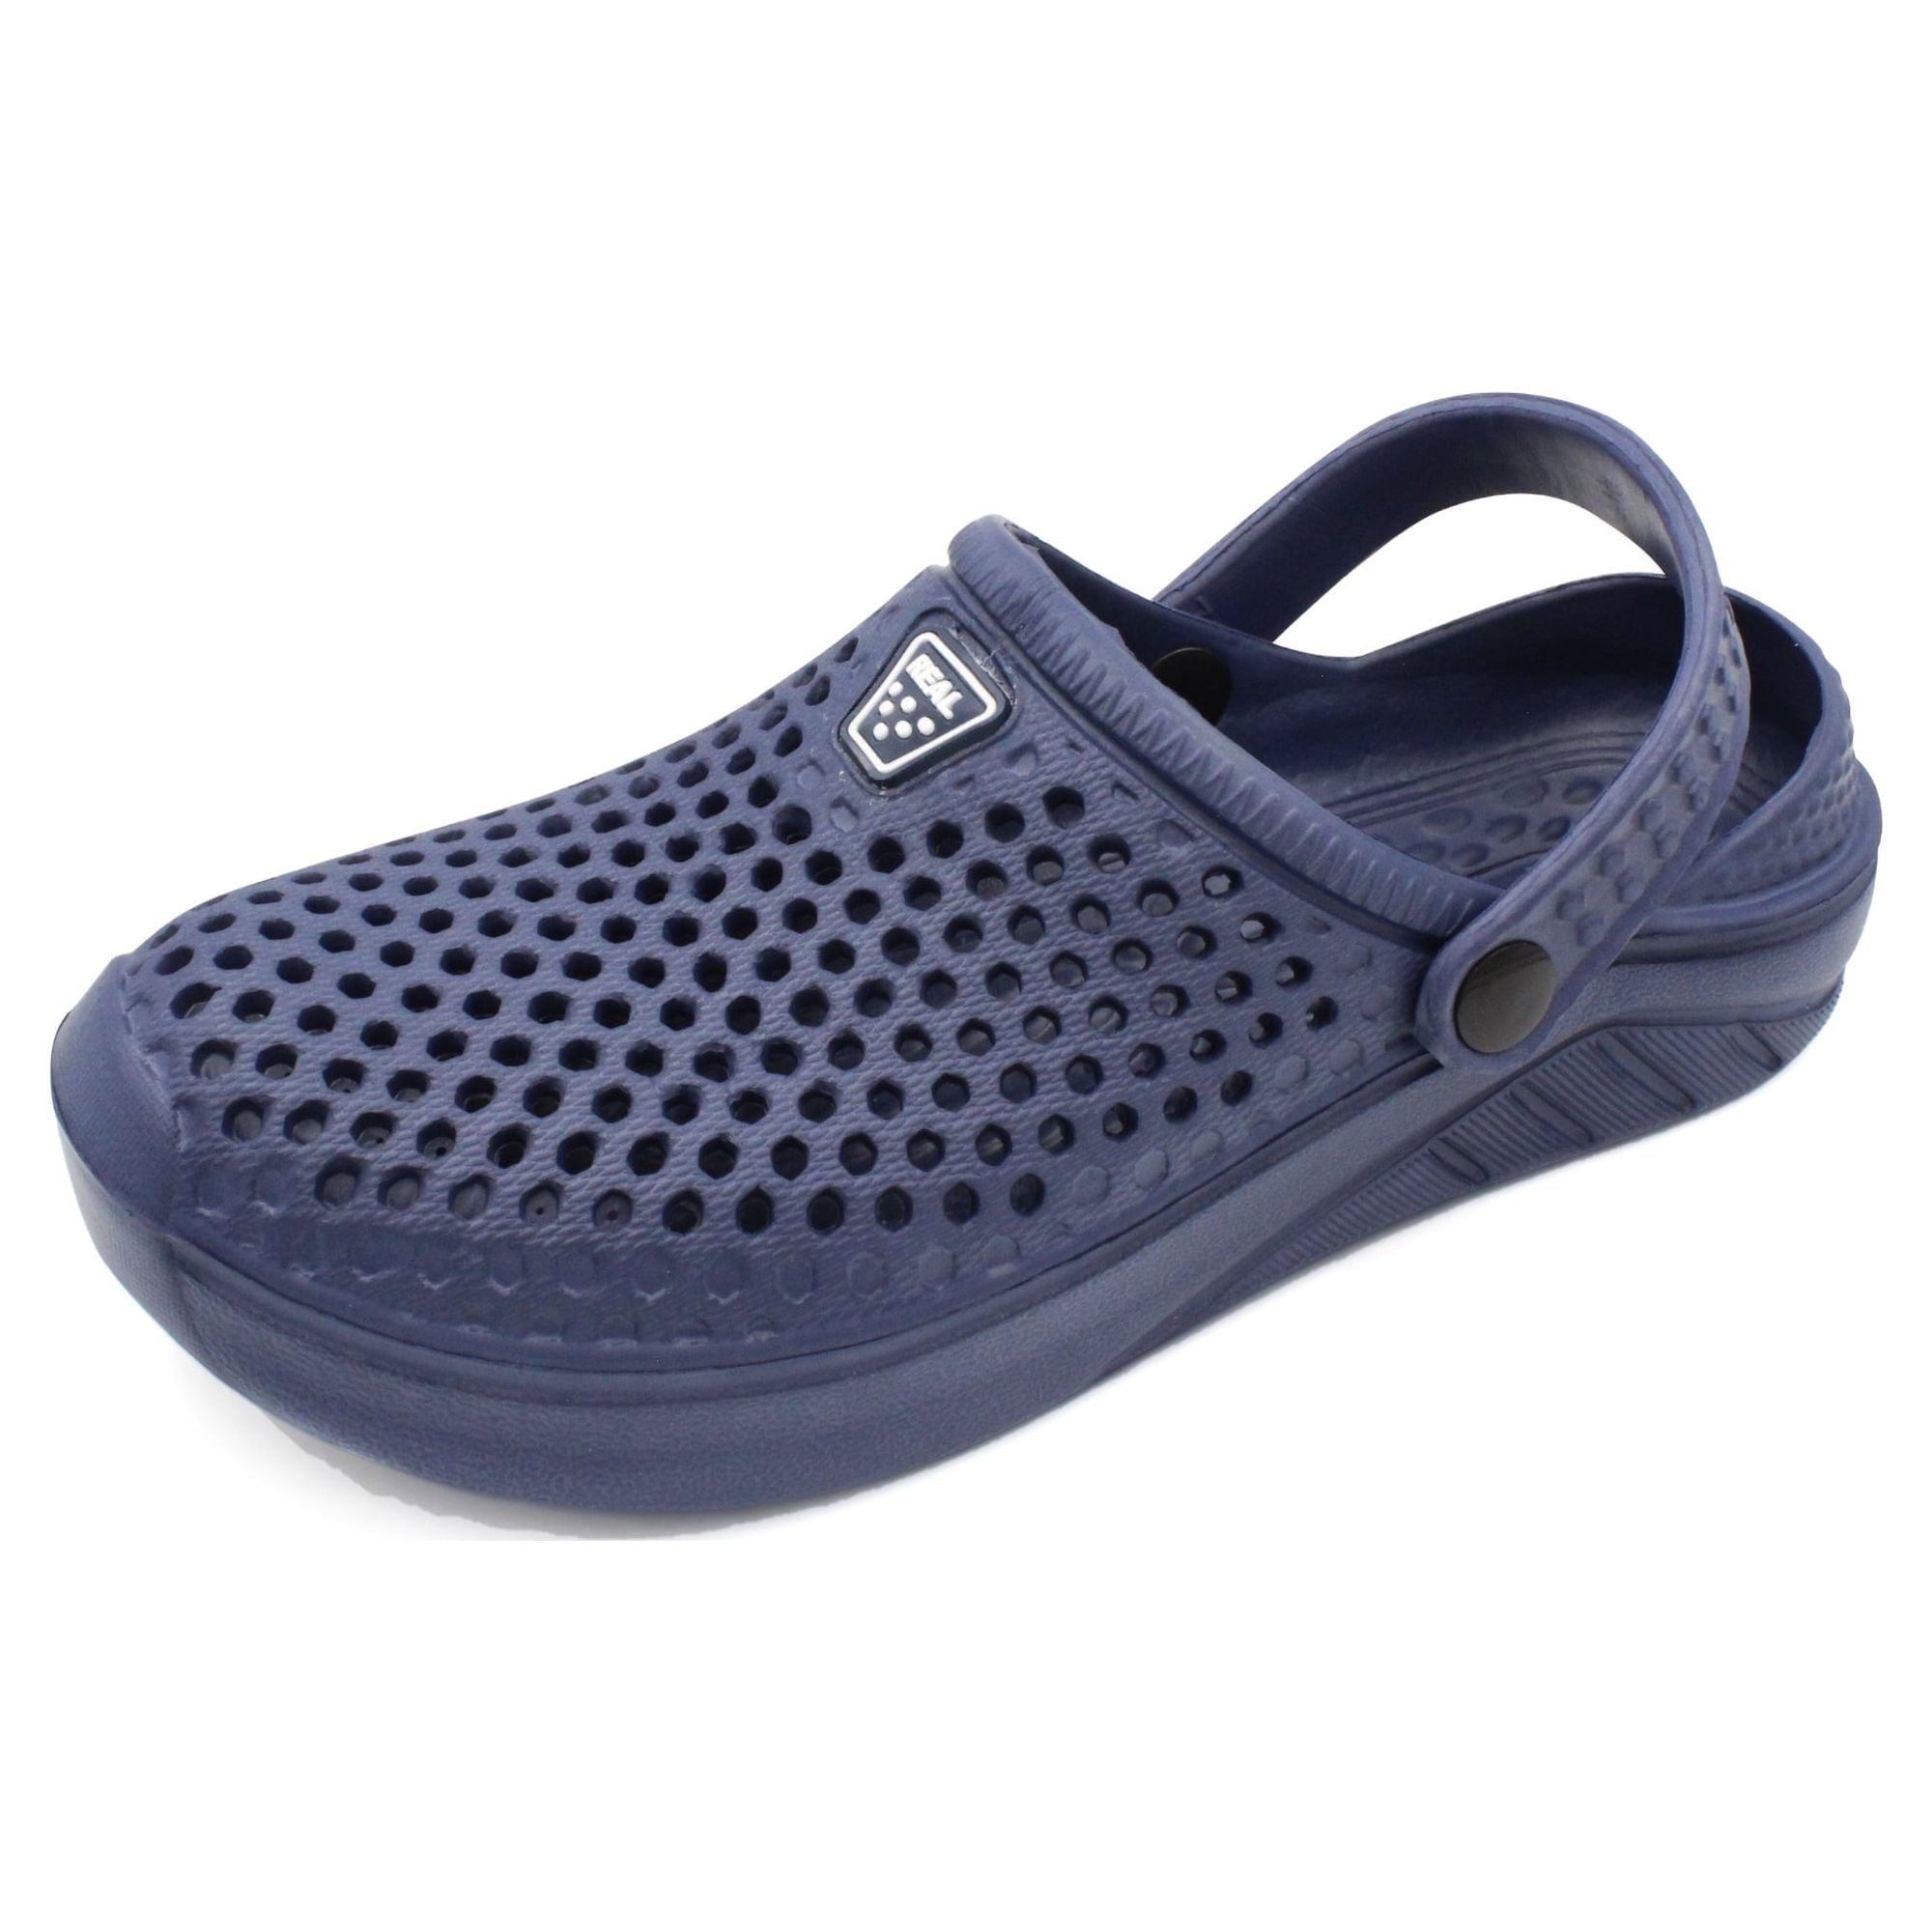 Ventana Mens Clogs Perforated Slingback Sandals Water Garden Shoes ...